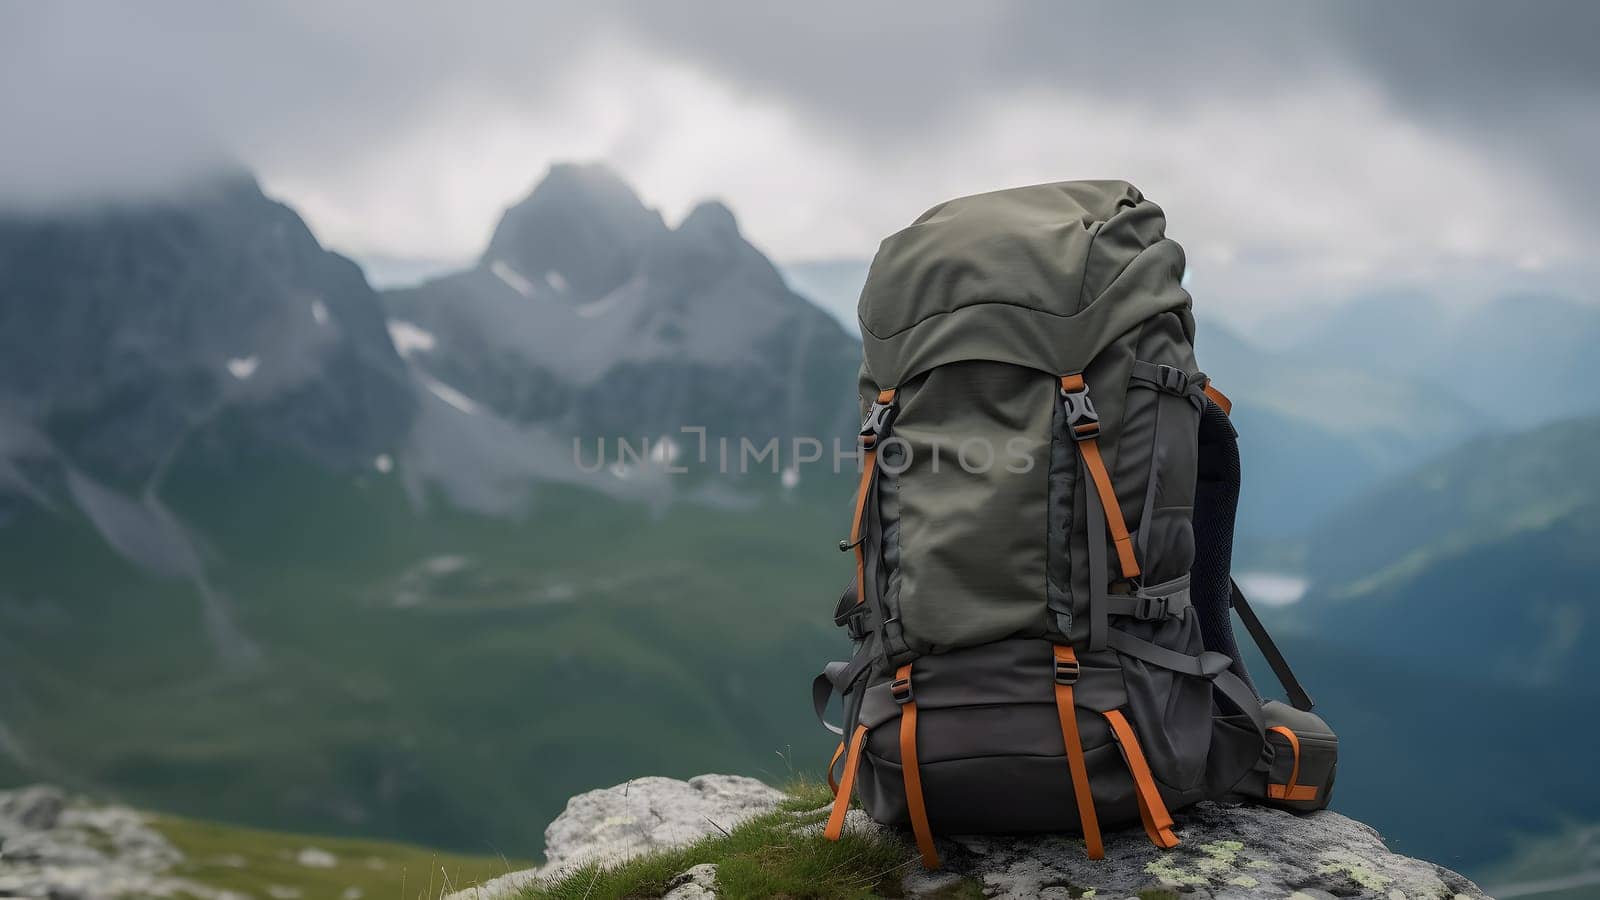 Big hiking and trekking backpack with blurred mountains in the background. Neural network generated in May 2023. Not based on any actual person, scene or pattern.